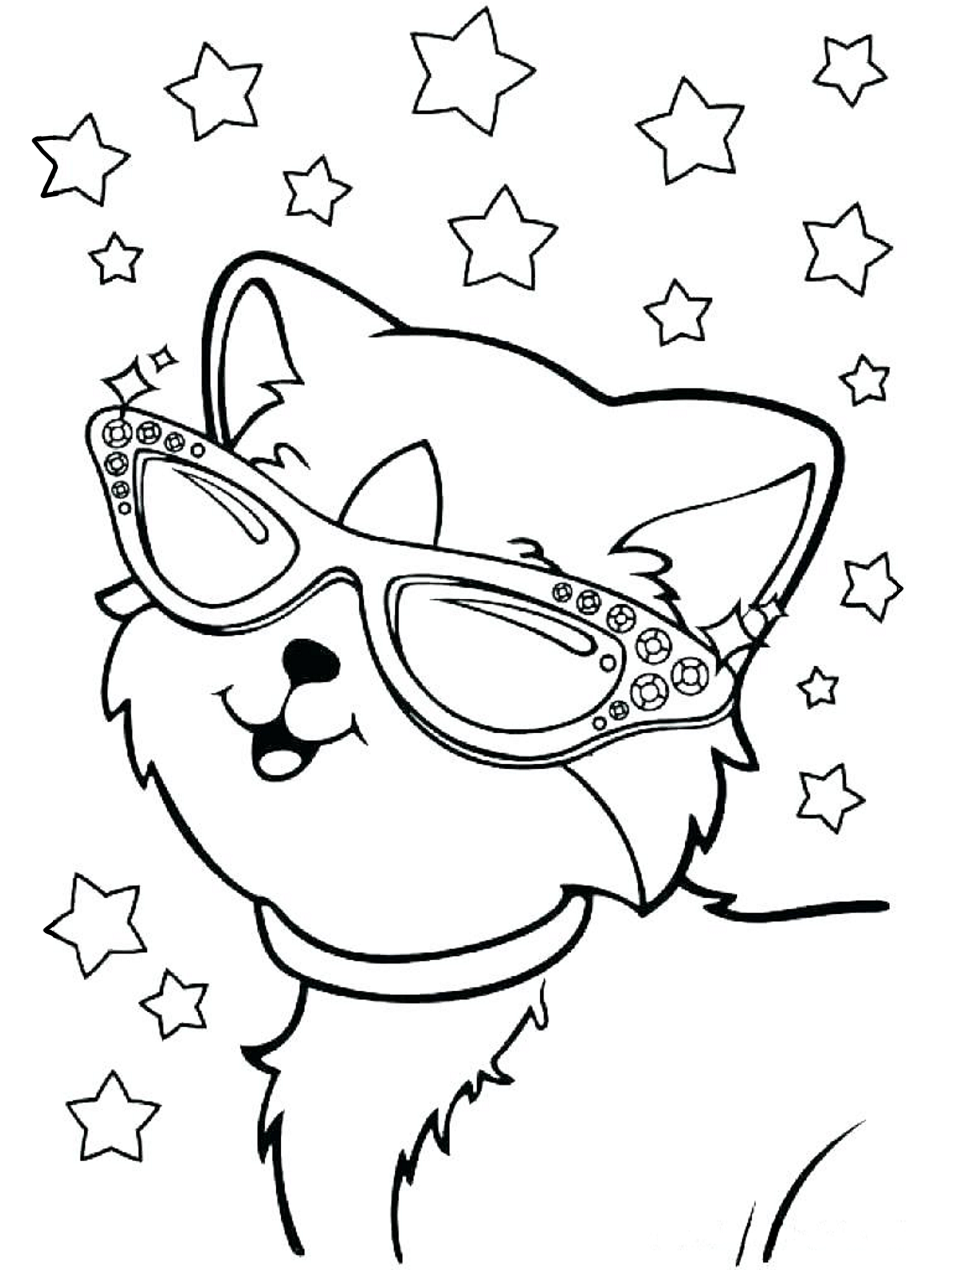 Download Lisa Frank Cat Wearing Glasses Coloring Page - Free ...